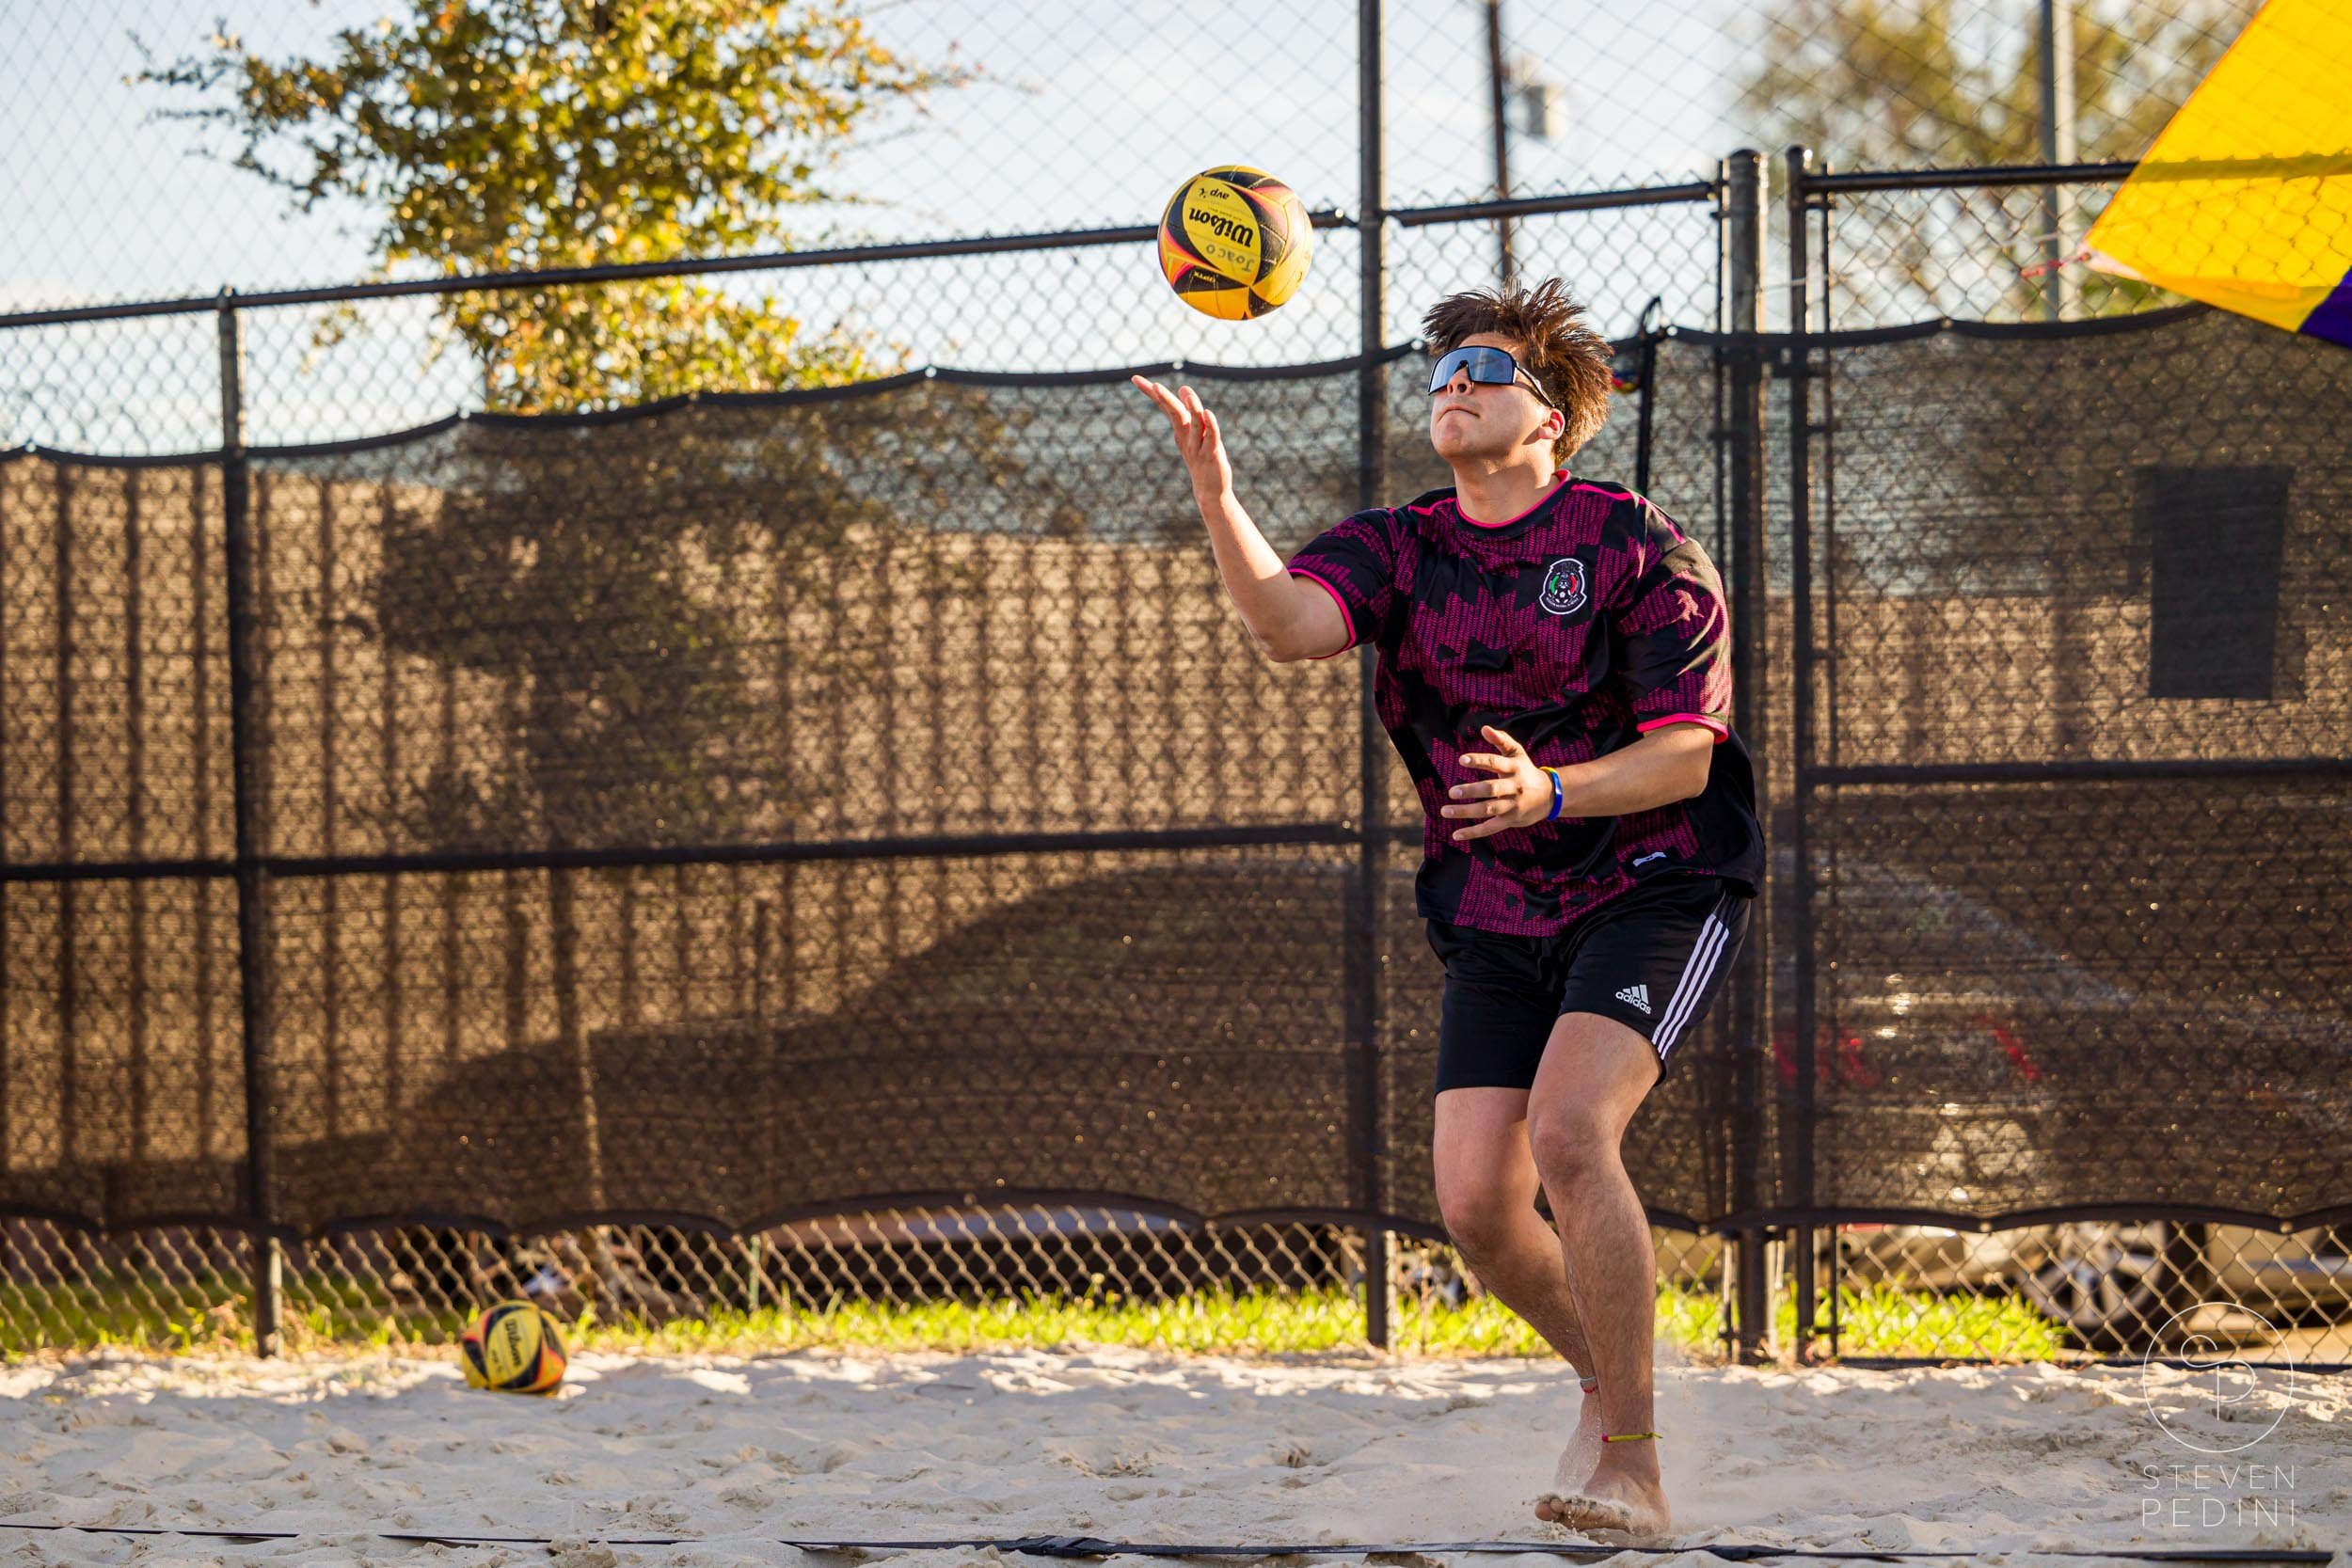 Steven Pedini Photography - Bumpy Pickle - Sand Volleyball - Houston TX - World Cup of Volleyball - 00129.jpg